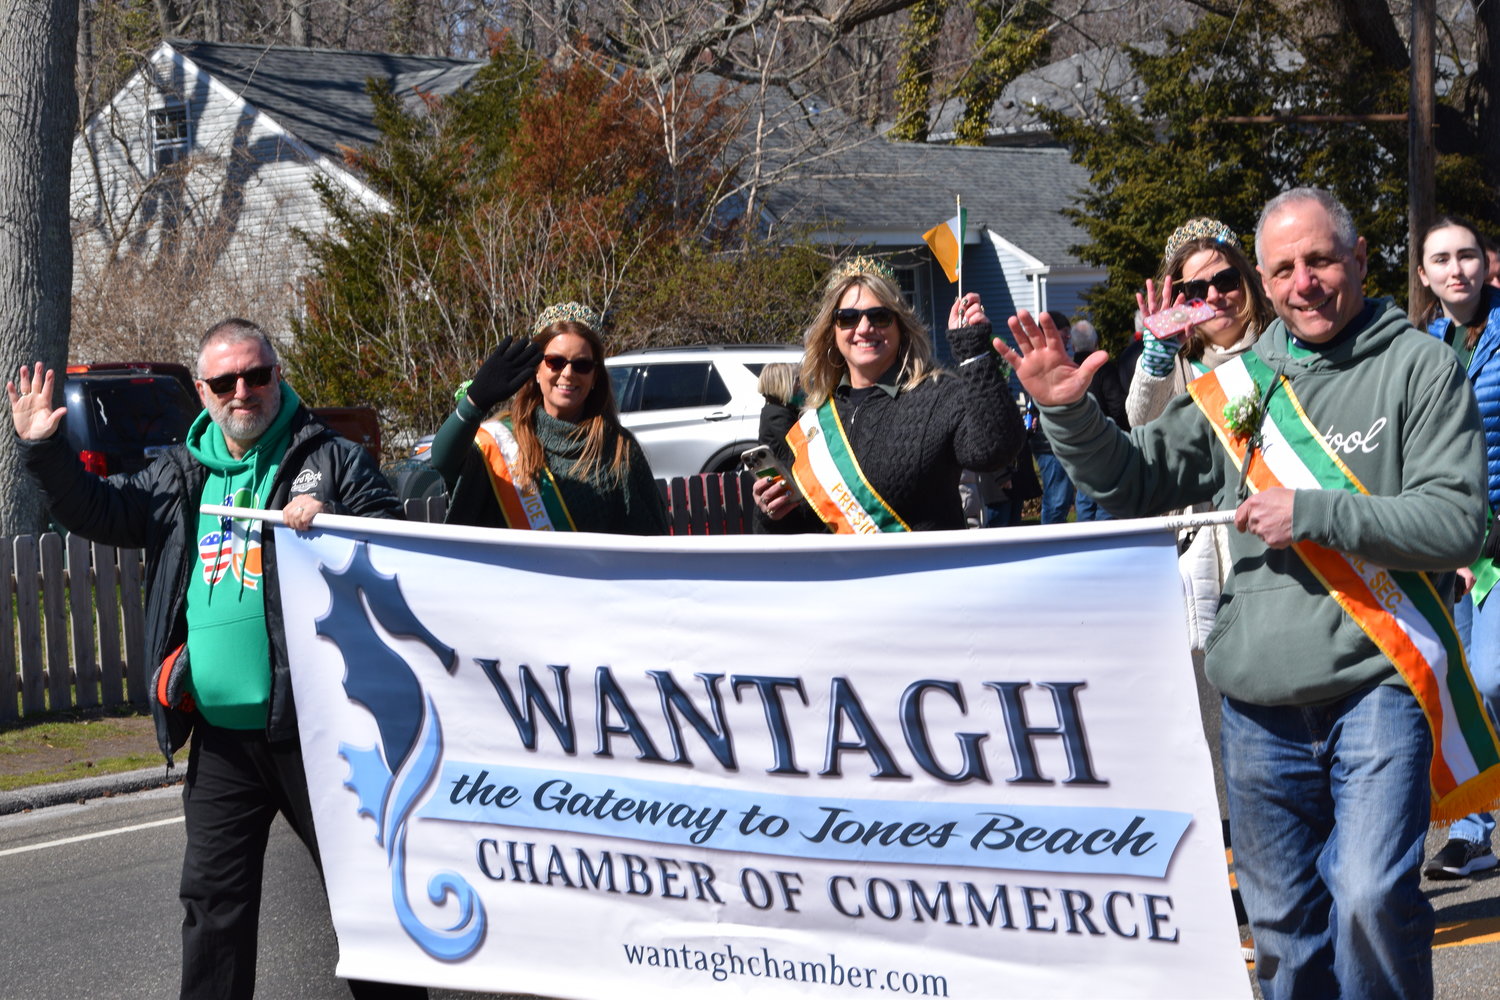 Michael Malaszczyk/Herald
members of The Wantagh Chamber of Commerce marched proudly down Wantagh Avenue at the third annual St. Patrick’s Day parade last Sunday. Howard Ritzer, far left, Chamber Vice President Karen Lofgren, President Cathy McGrory Powell, Vice President Marilynne Mazzella Rich and Anthony Avena were all smiles as they followed Grand Marshal Mike Dunphy.